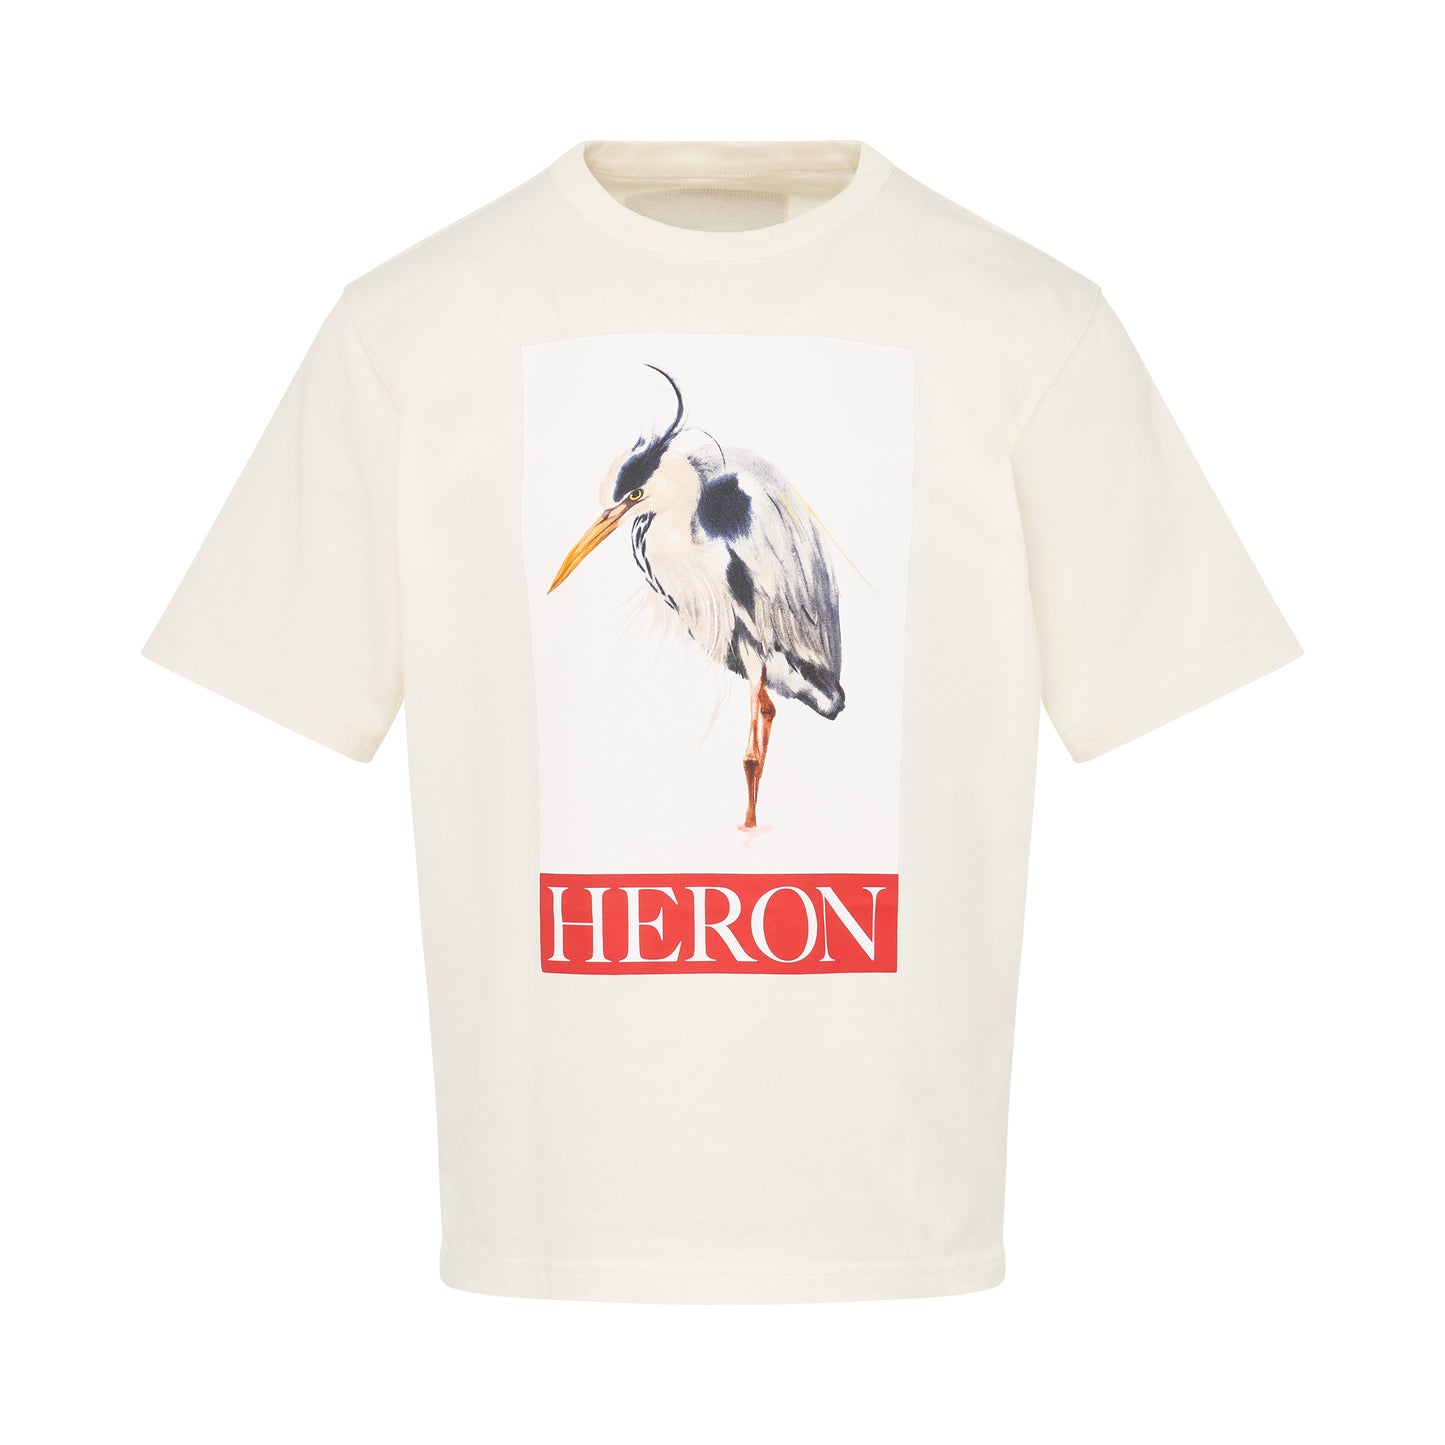 Heron Bird Painted Short Sleeve T-Shirt in Ivory/Red